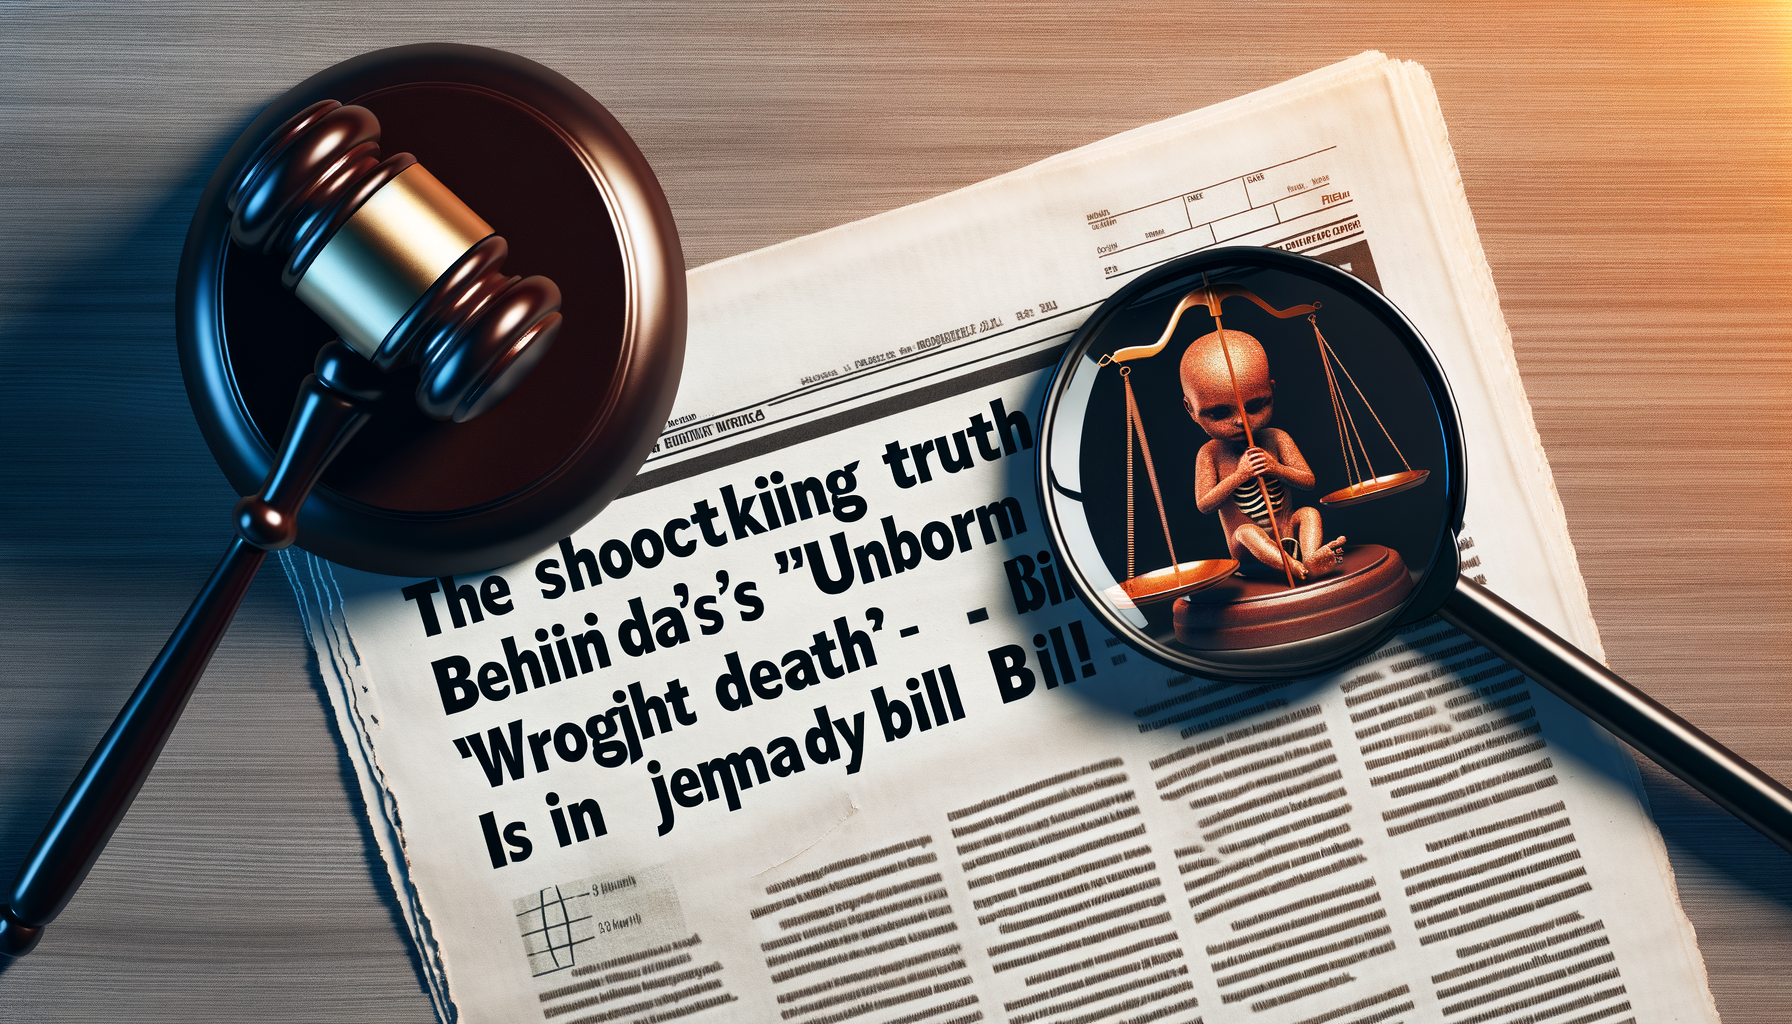 discover why florida's 'unborn child' wrongful death bill is in jeopardy and what you need to know about it.